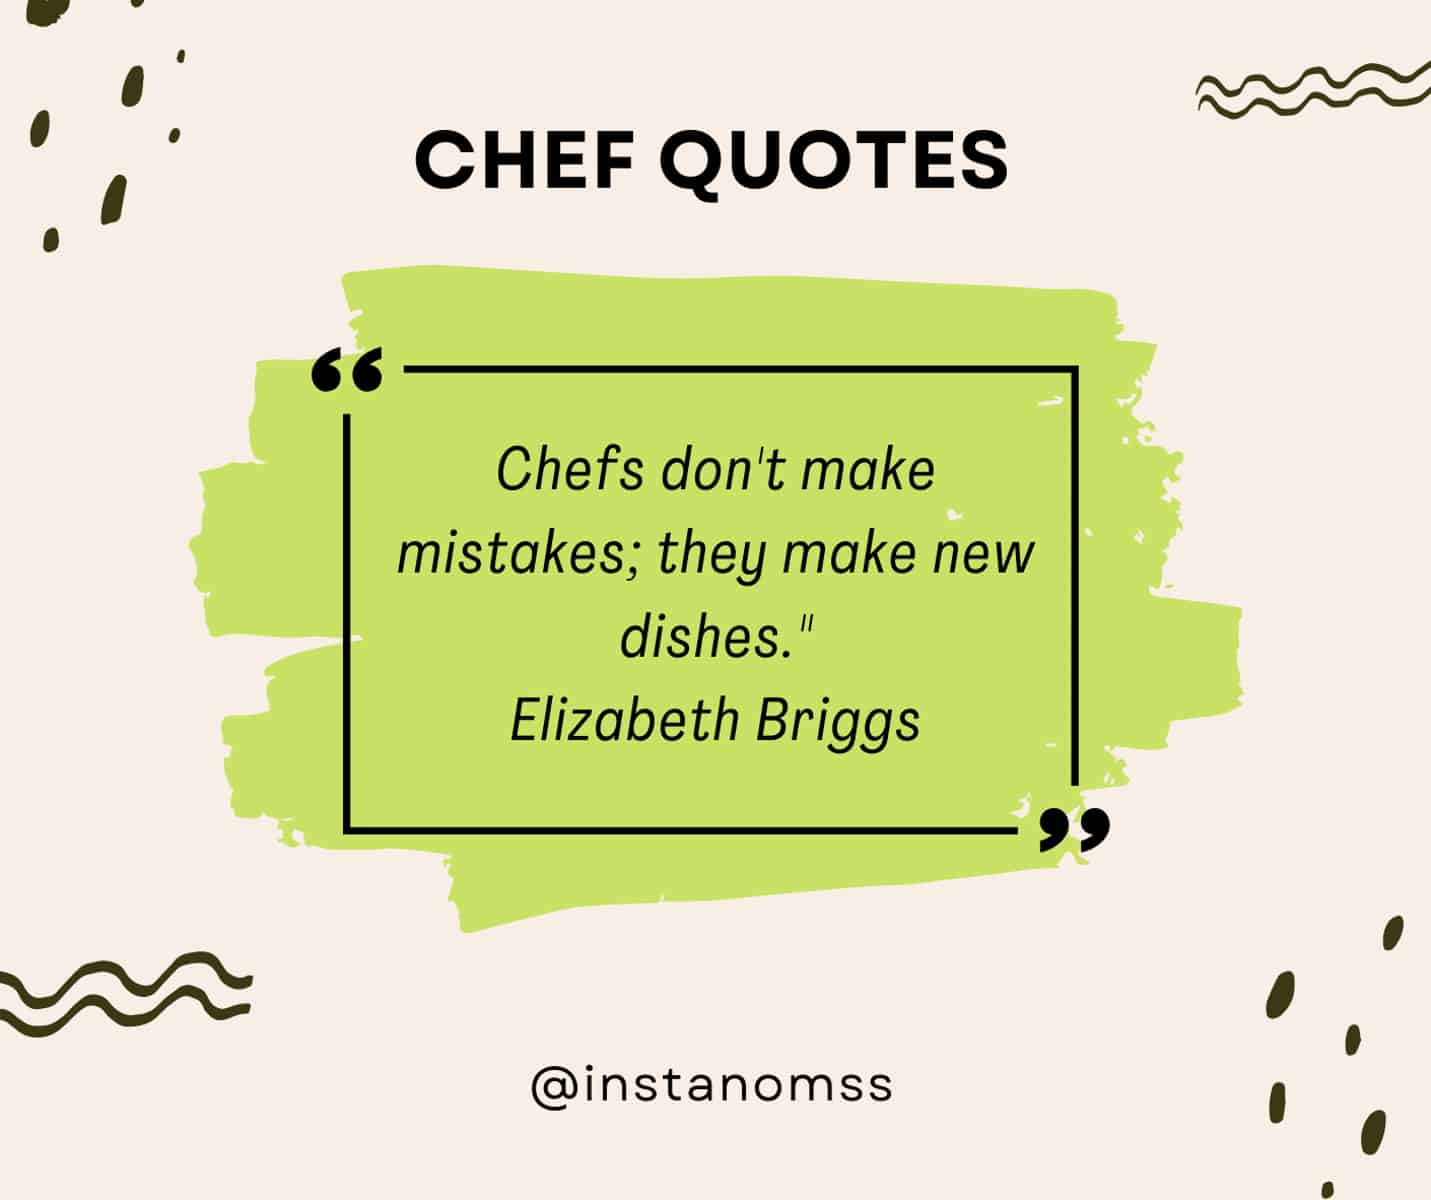 Chefs don't make mistakes; they make new dishes." Elizabeth Briggs